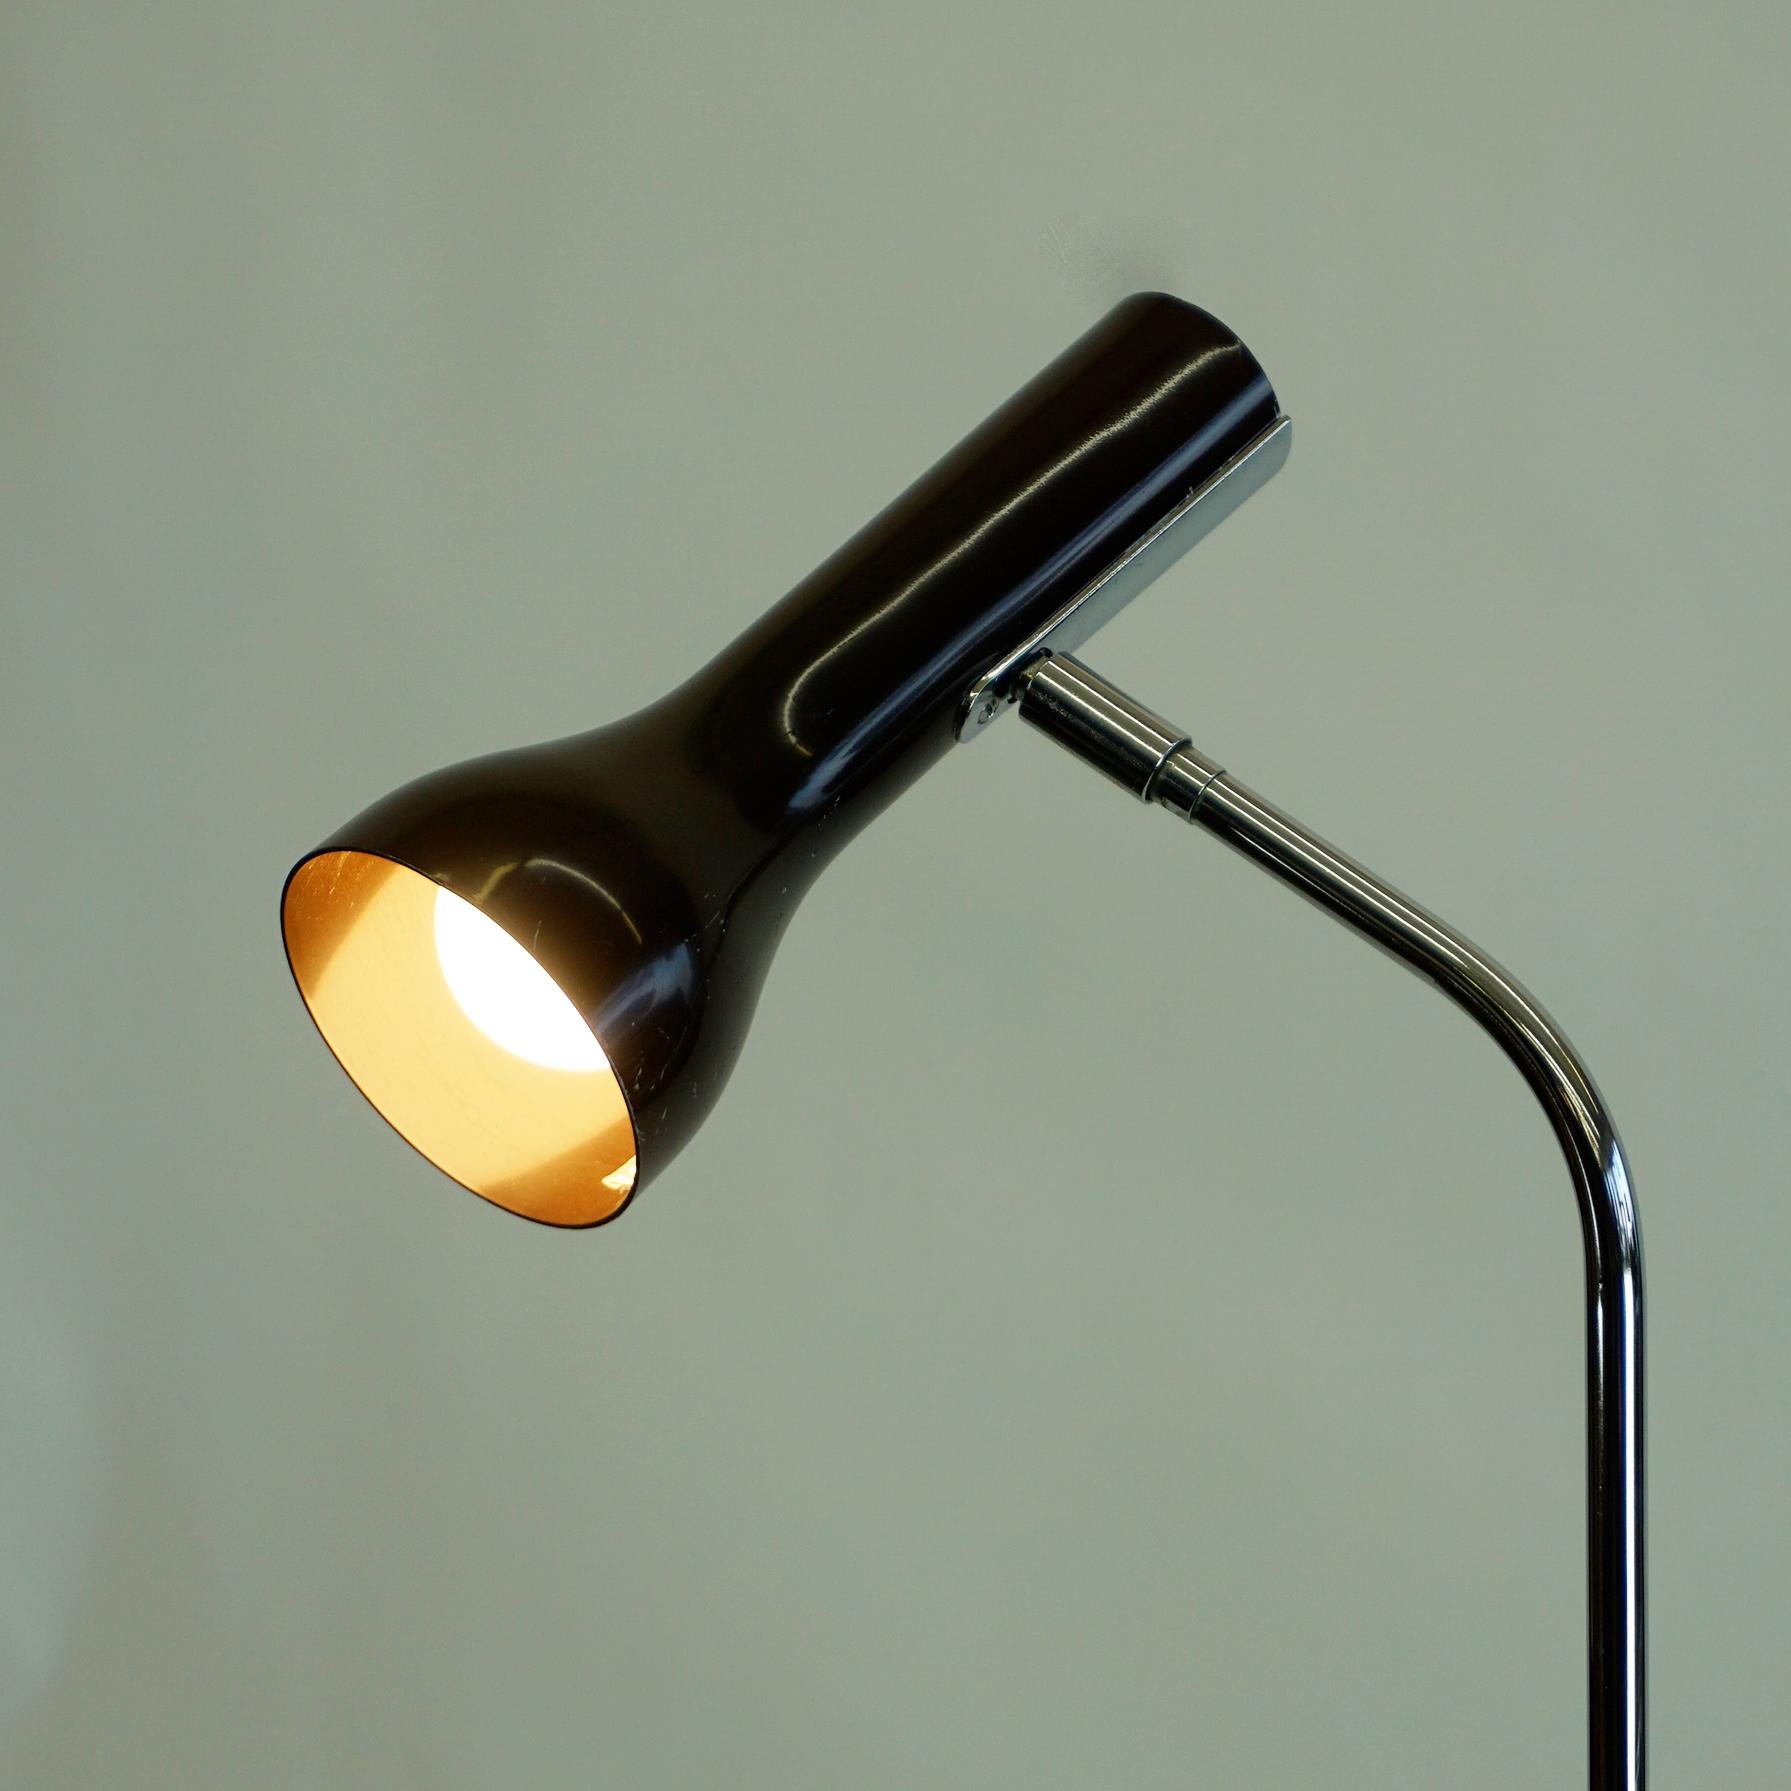 Chocolate Brown 1960s Chrome Spot Floor Lamp by LAD Team for Swiss Lamps 2